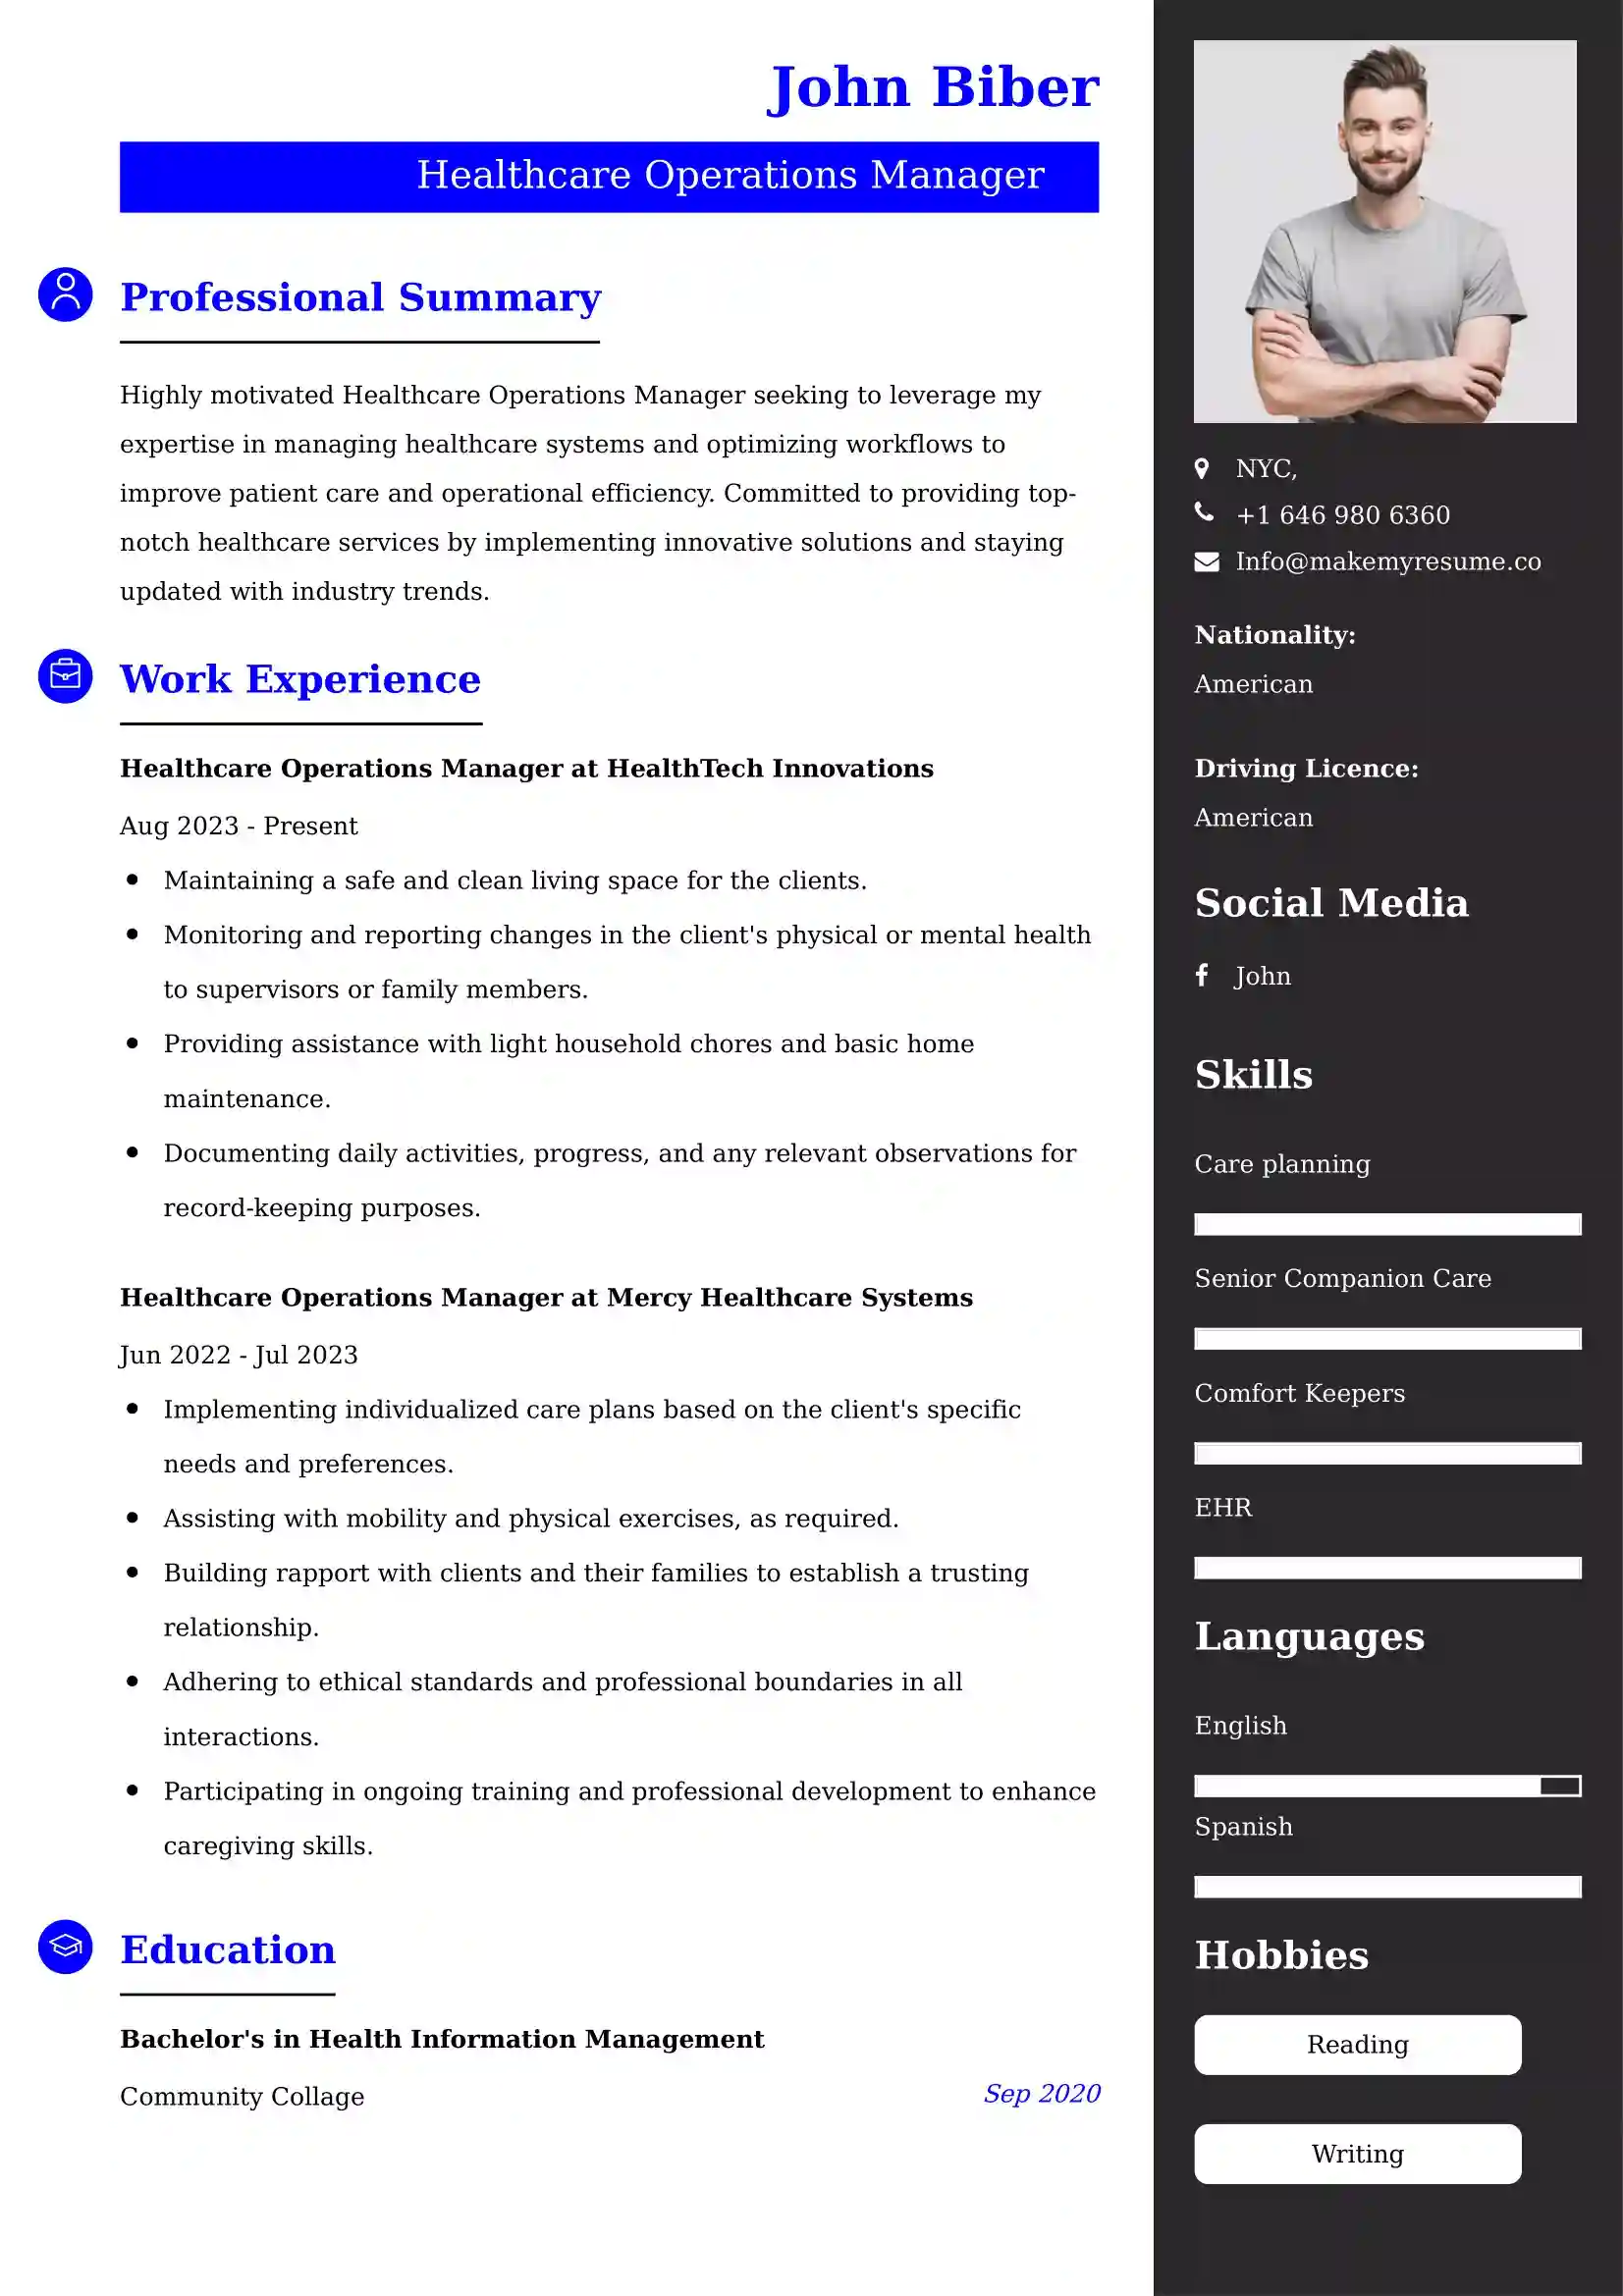 Healthcare Operations Manager Resume Examples - UK Format, Latest Template.